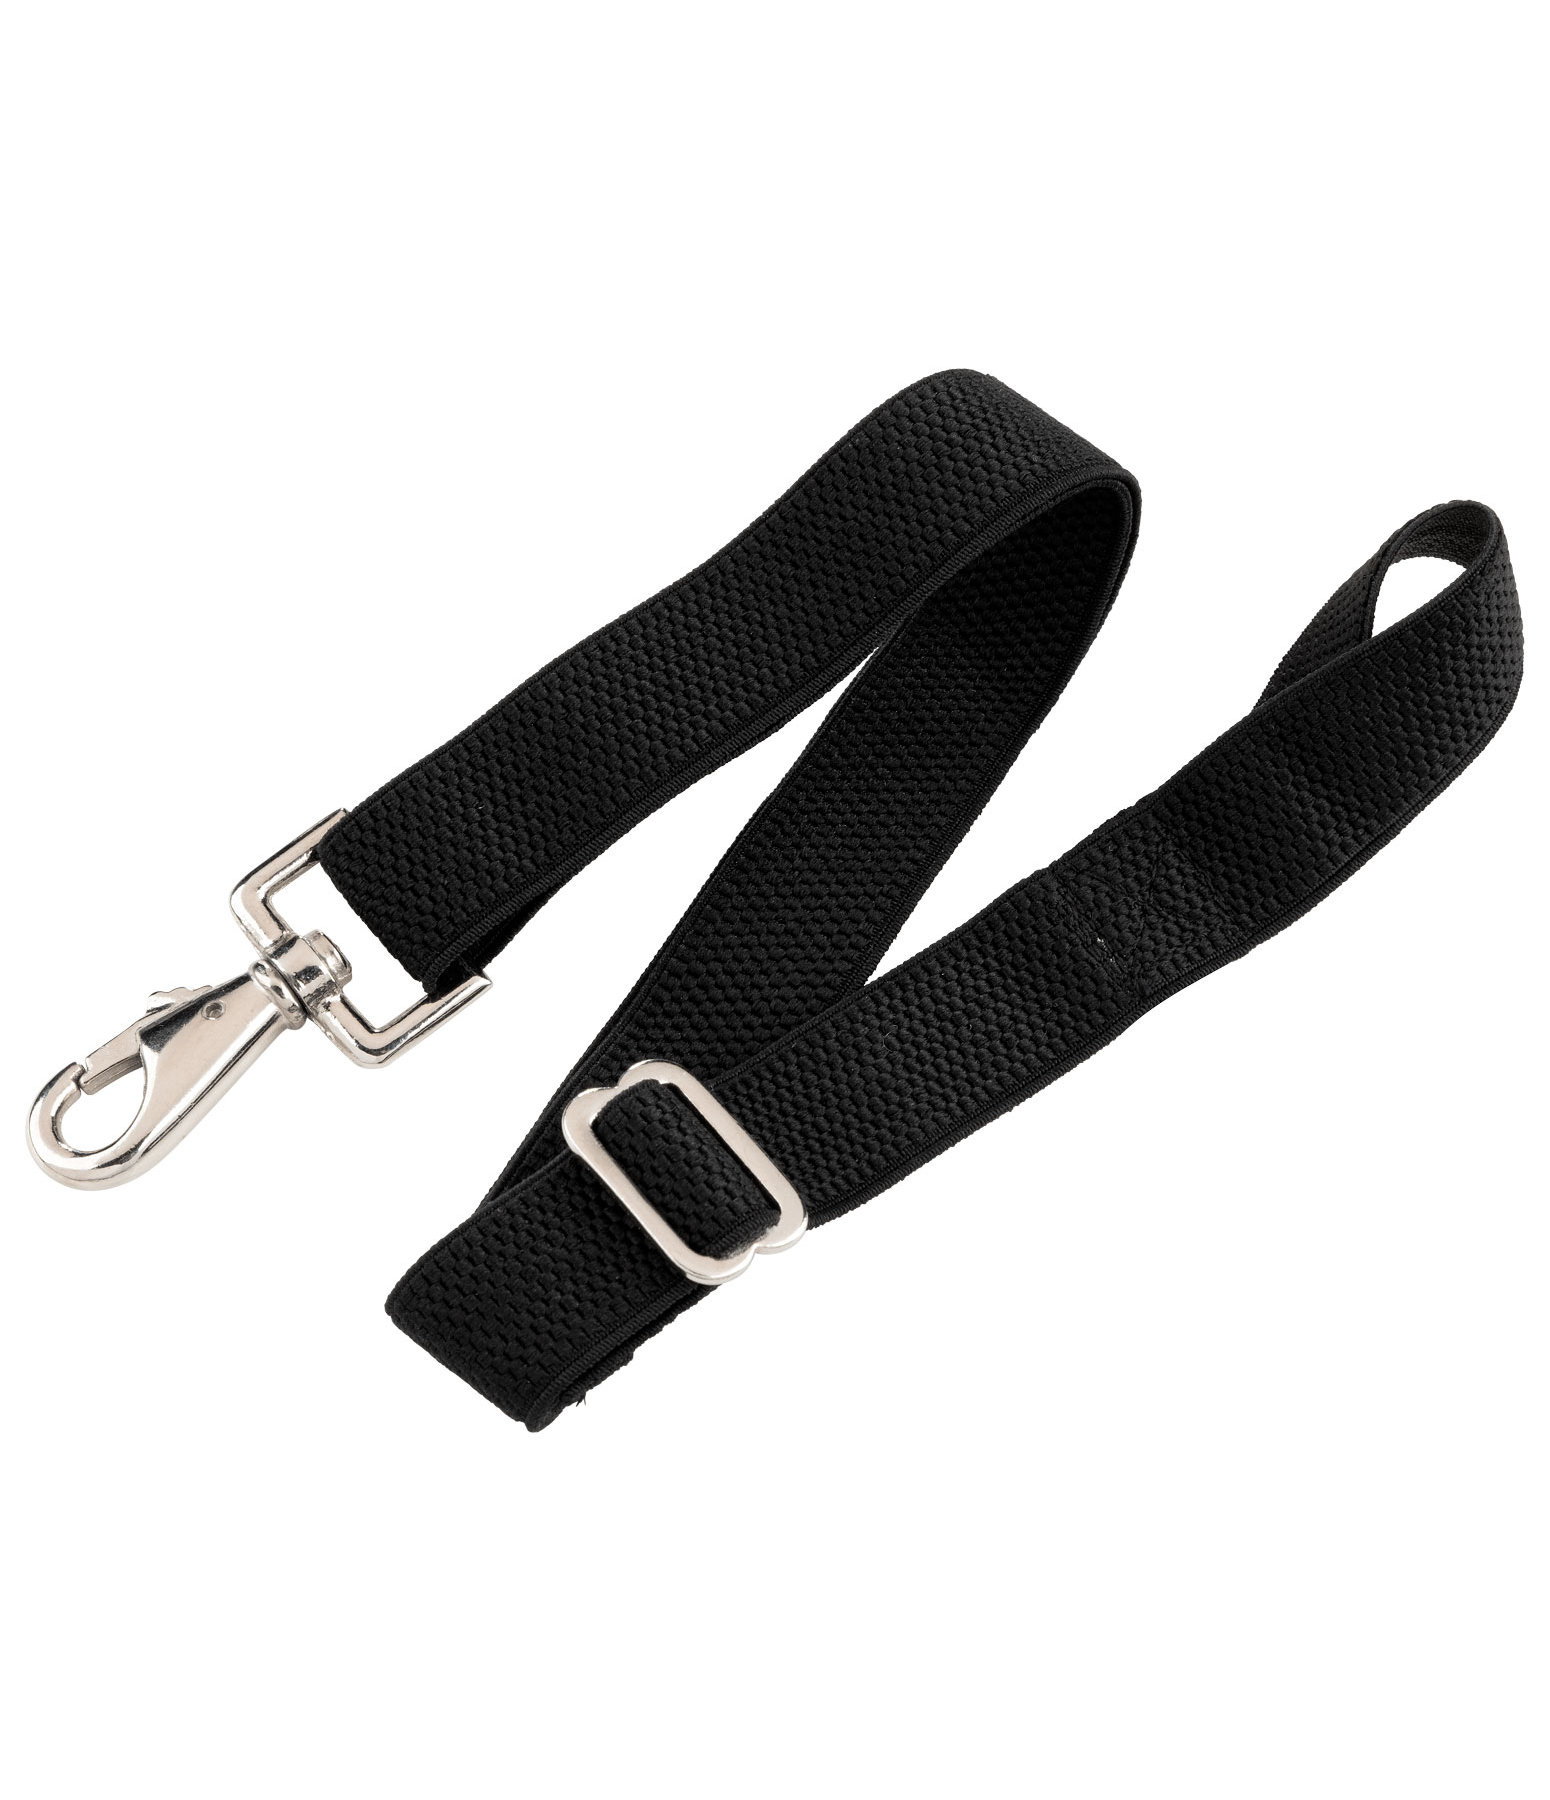 Elastic Leg Cords with Snap Hook